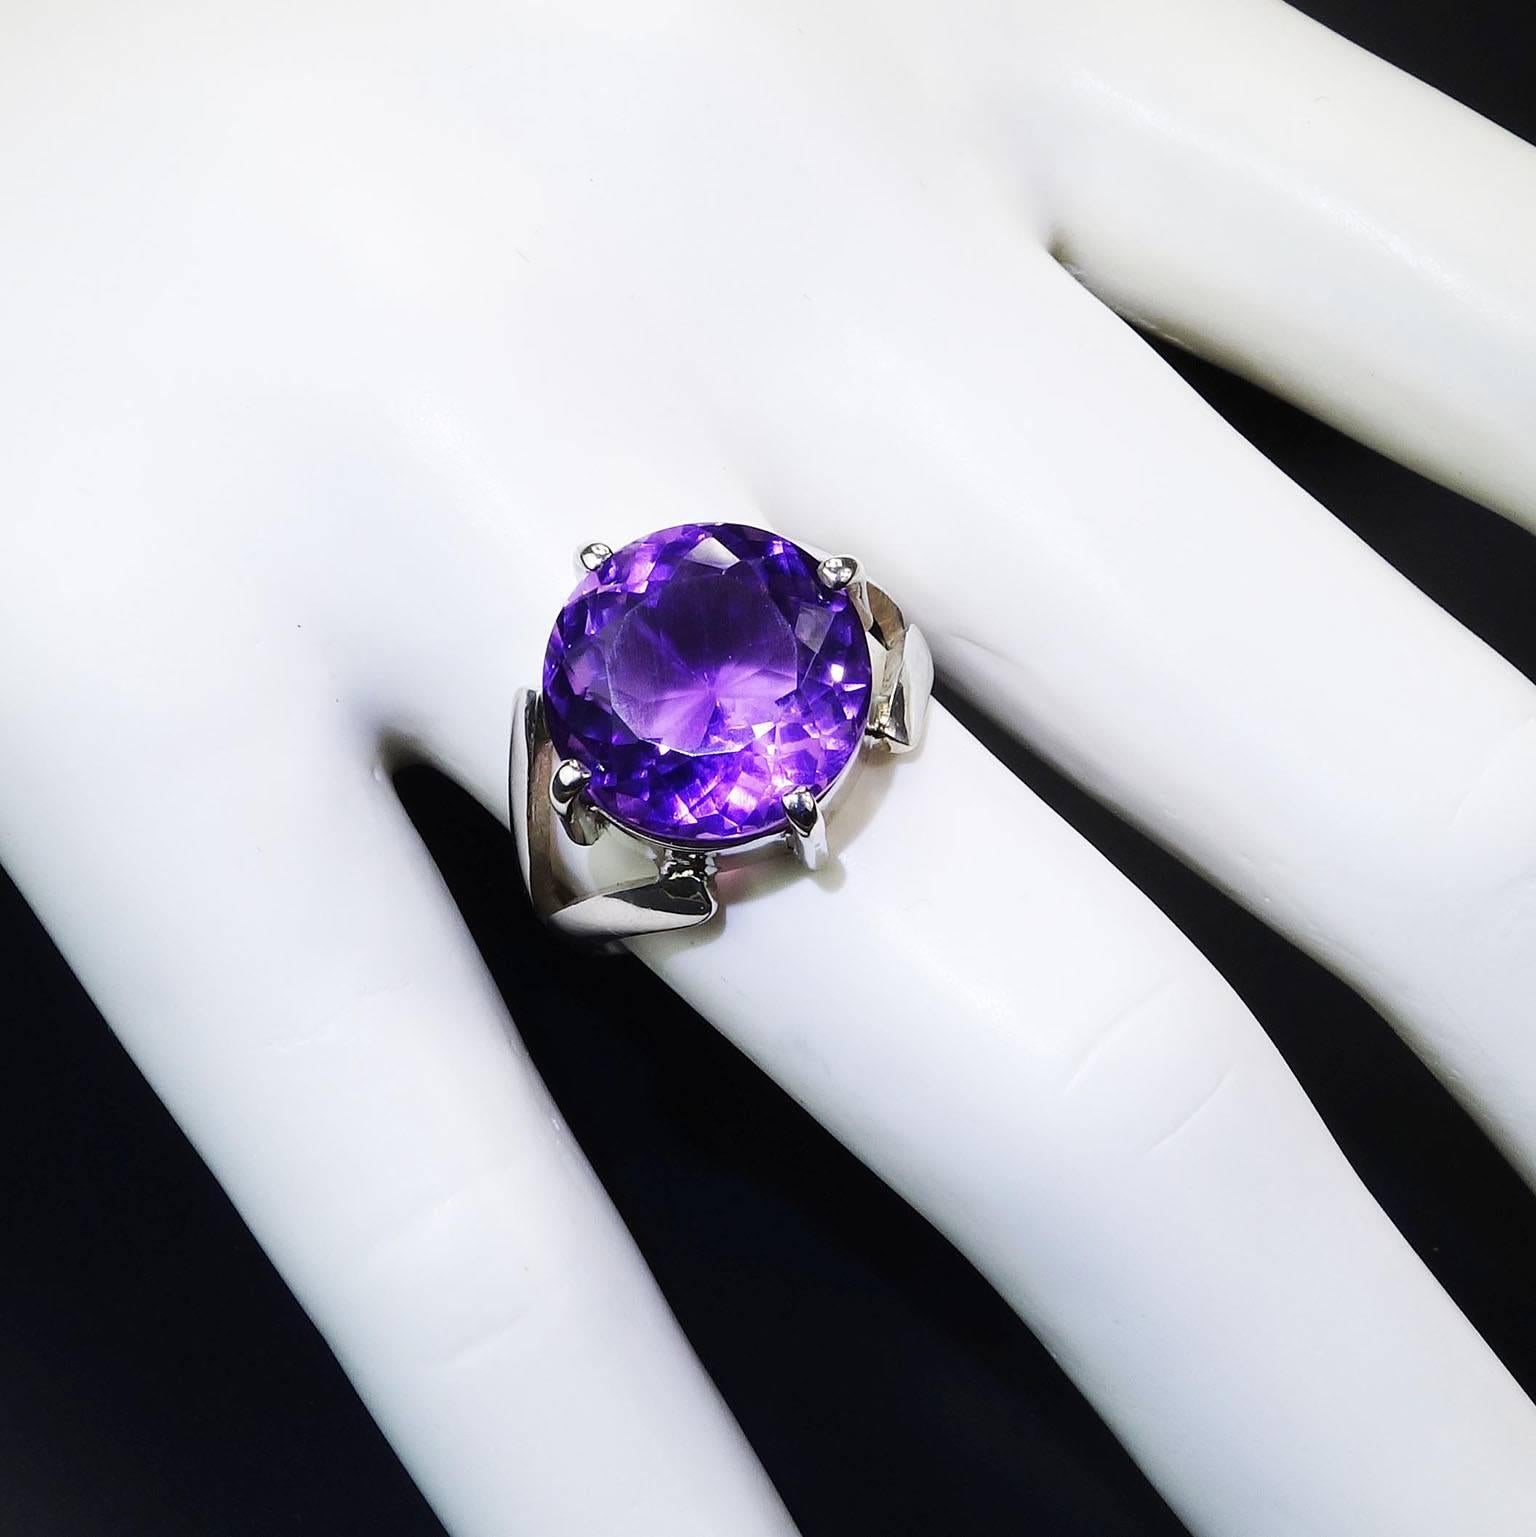 For the amethyst lover! February's birthstone. This custom made, round Brazilian Amethyst (13mm) has flashes of pink. The sterling silver setting perfectly complements the unique gemstone and was designed and created in our studio in the mountains